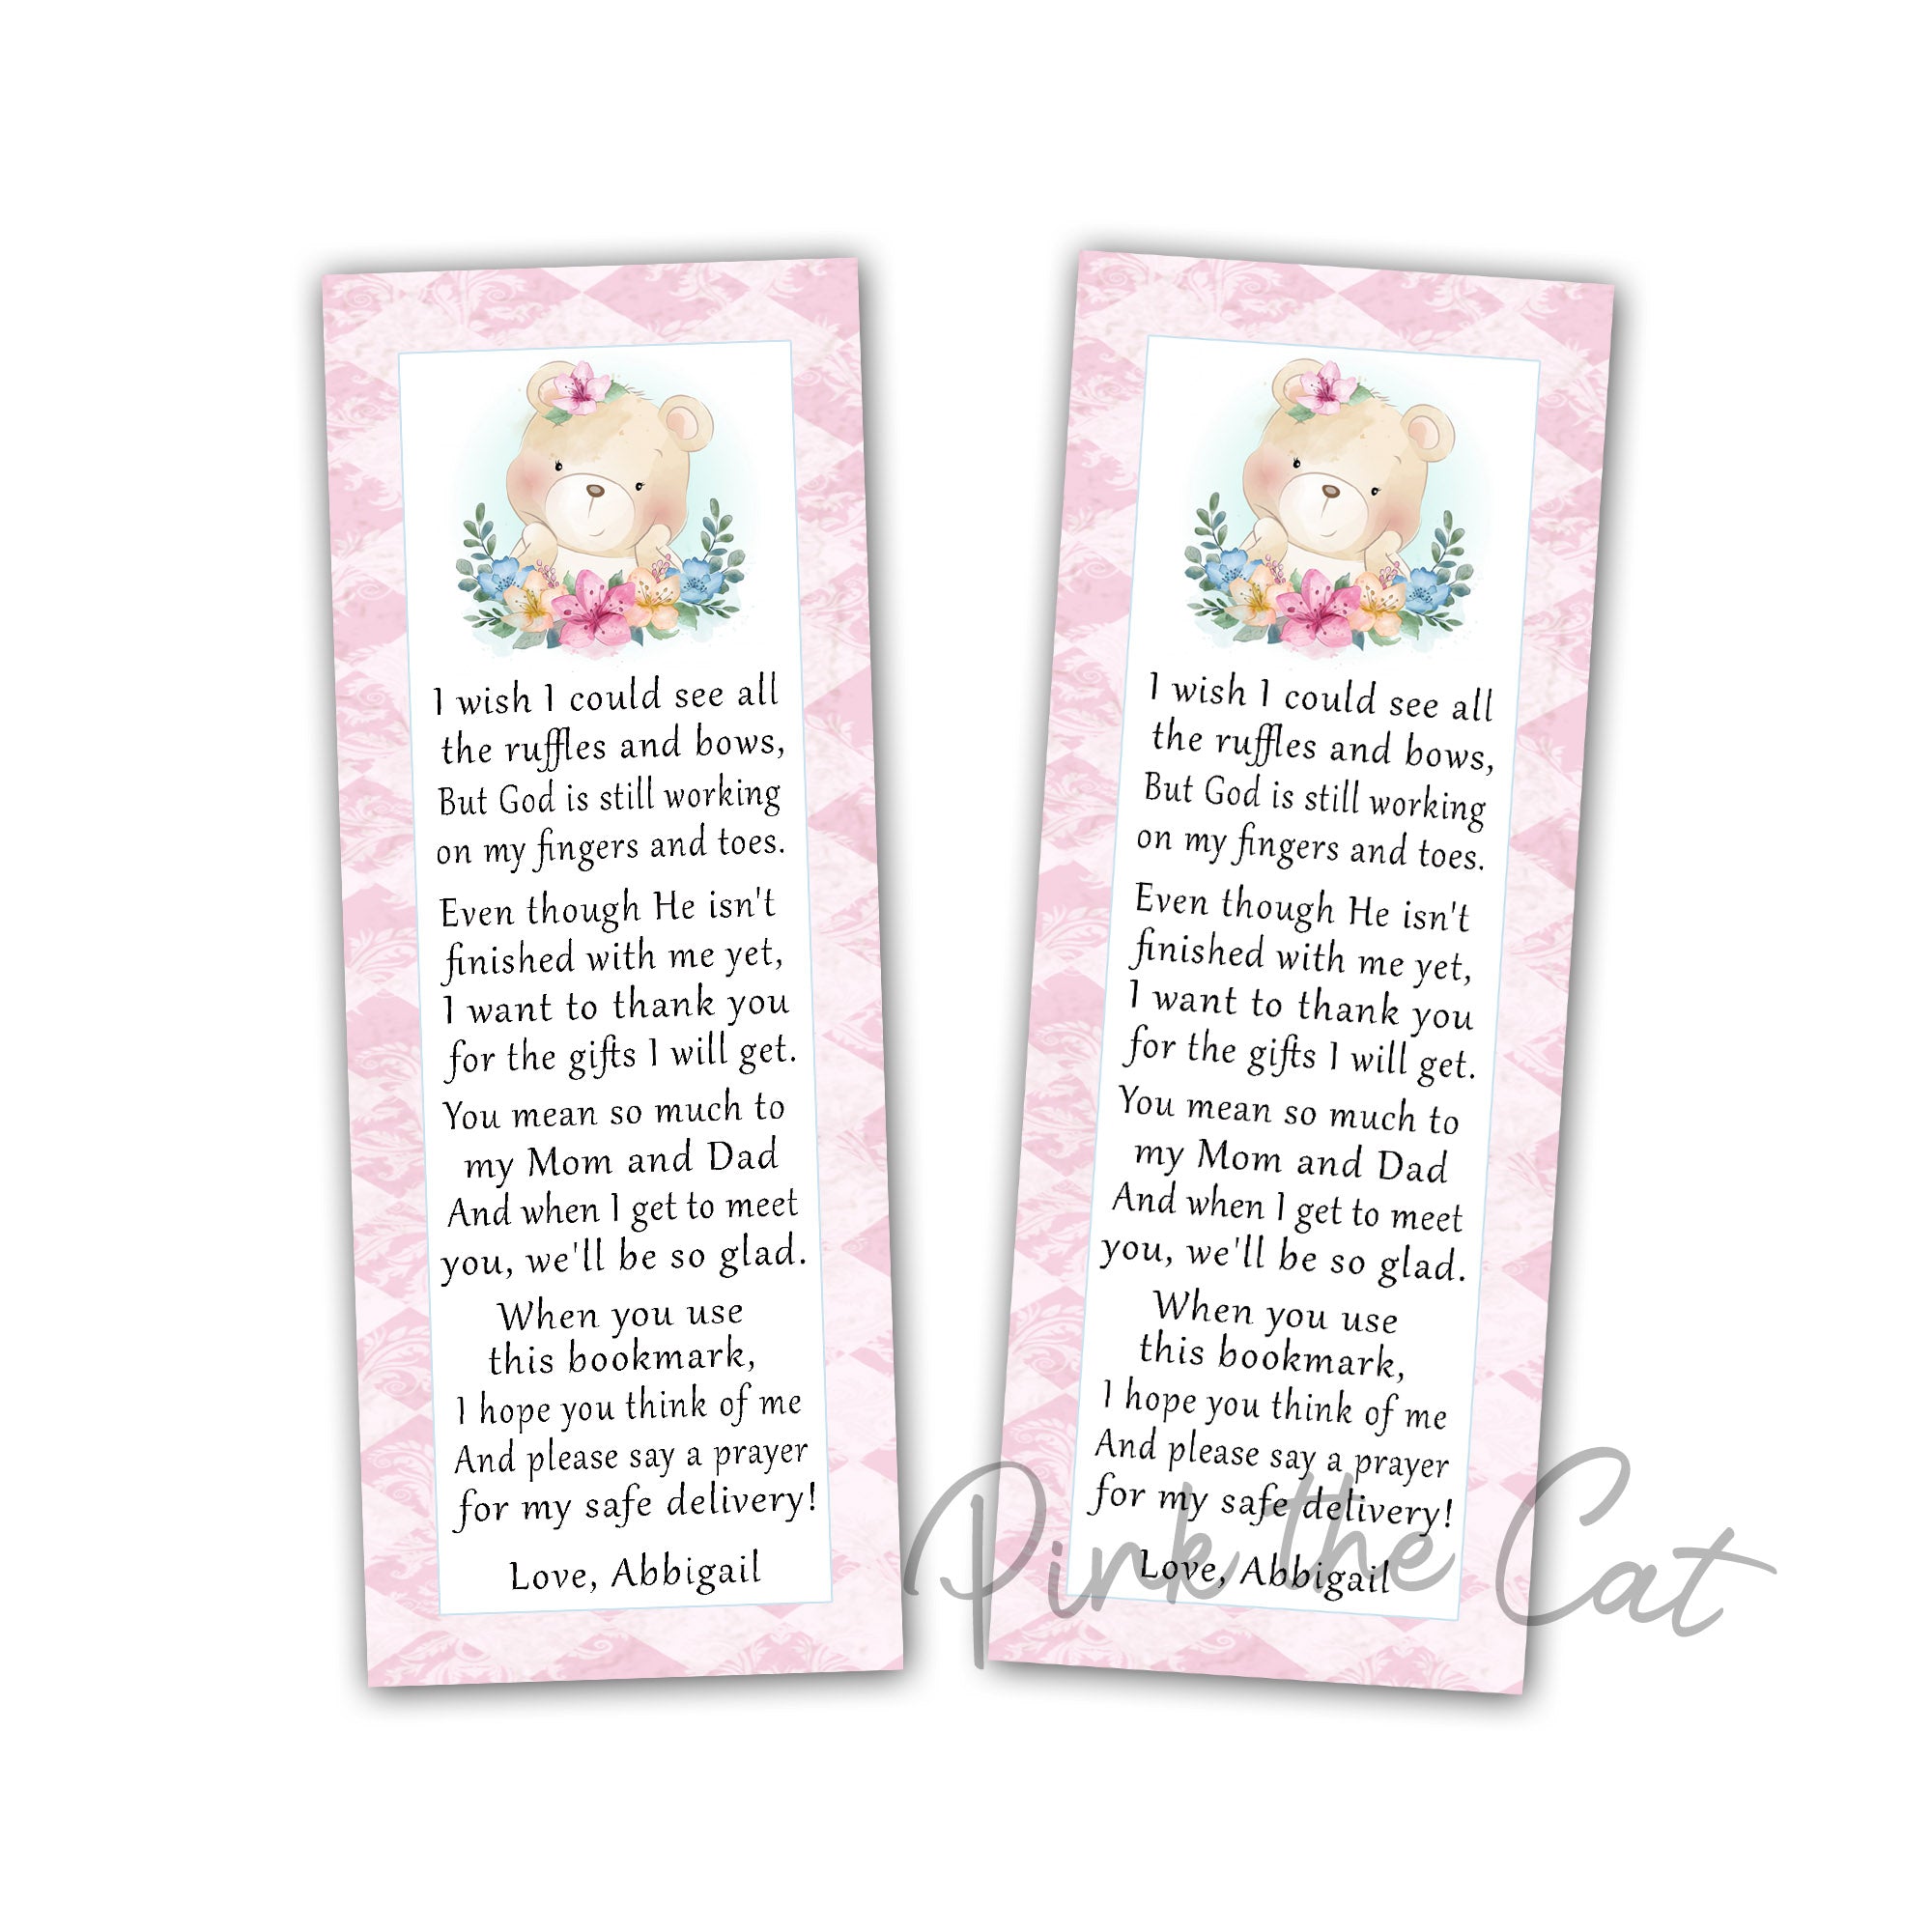 Bear bookmarks floral watercolor